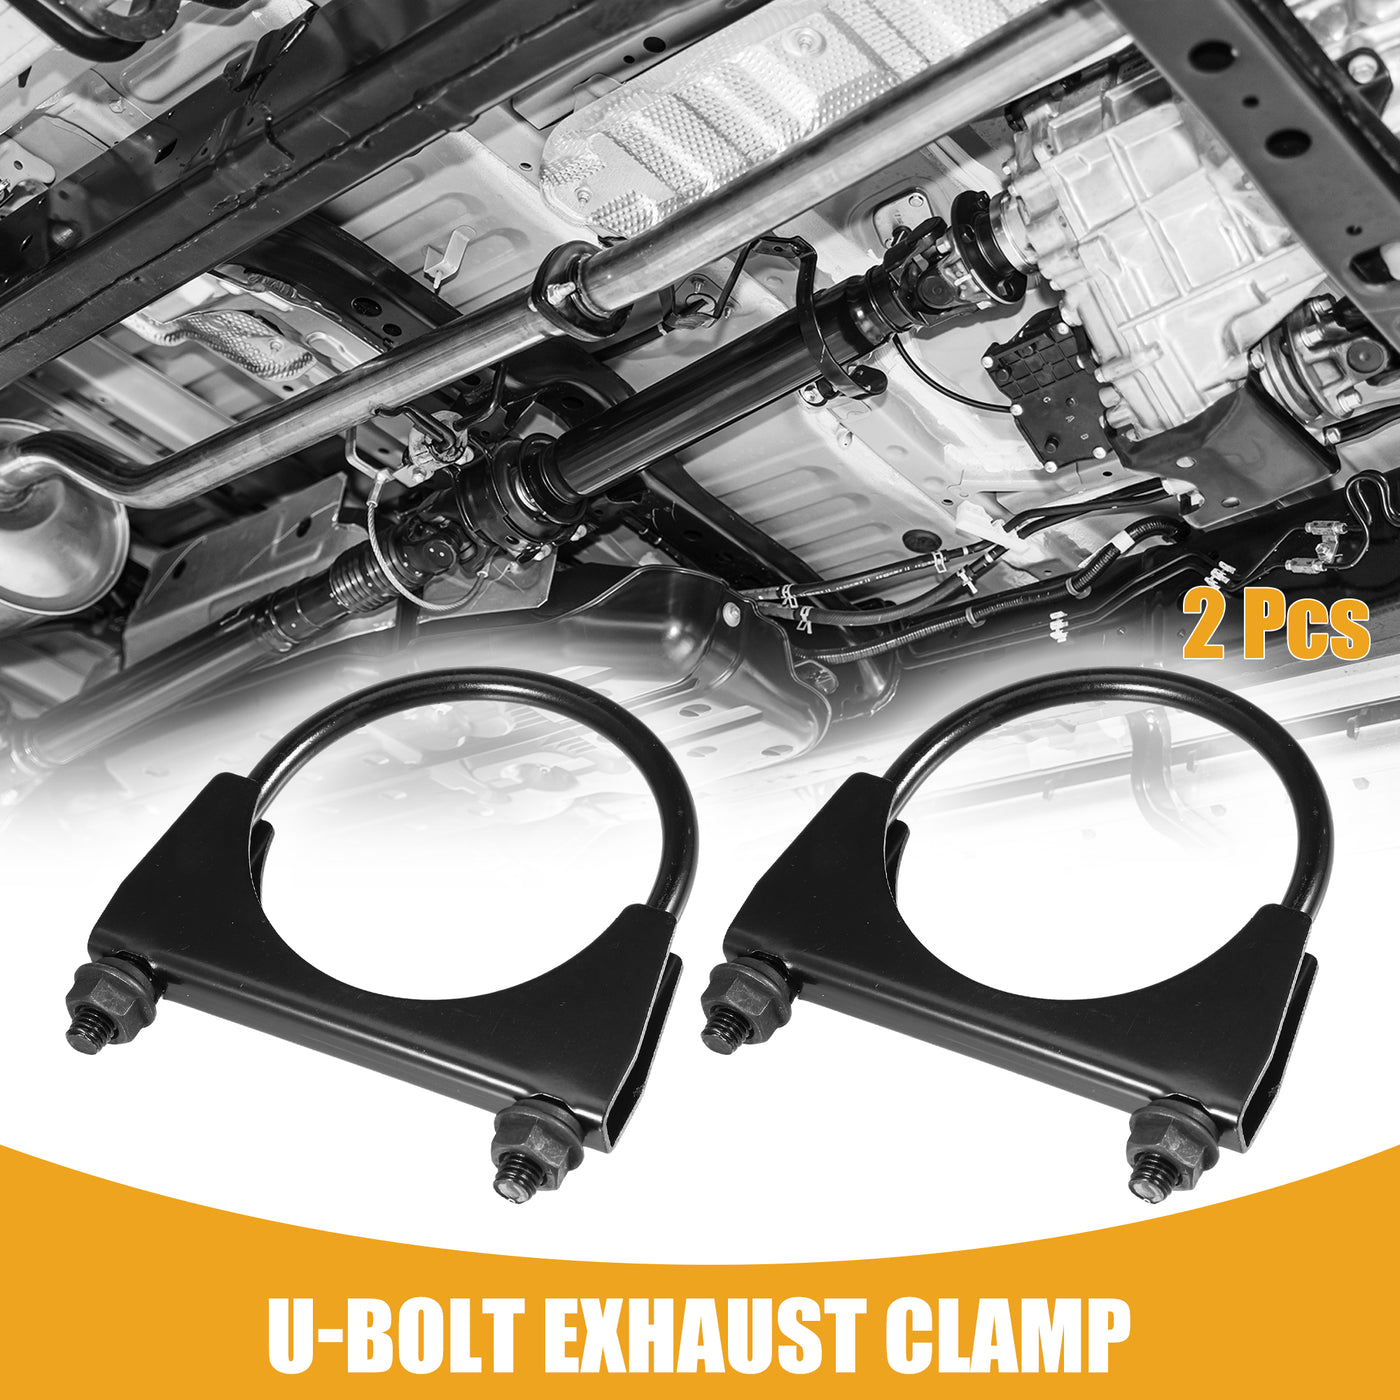 Partuto 2 Pcs Universal U-Bolt Exhaust Clamp - Car Muffer Clamps Exhaust - Stainless Steel Black